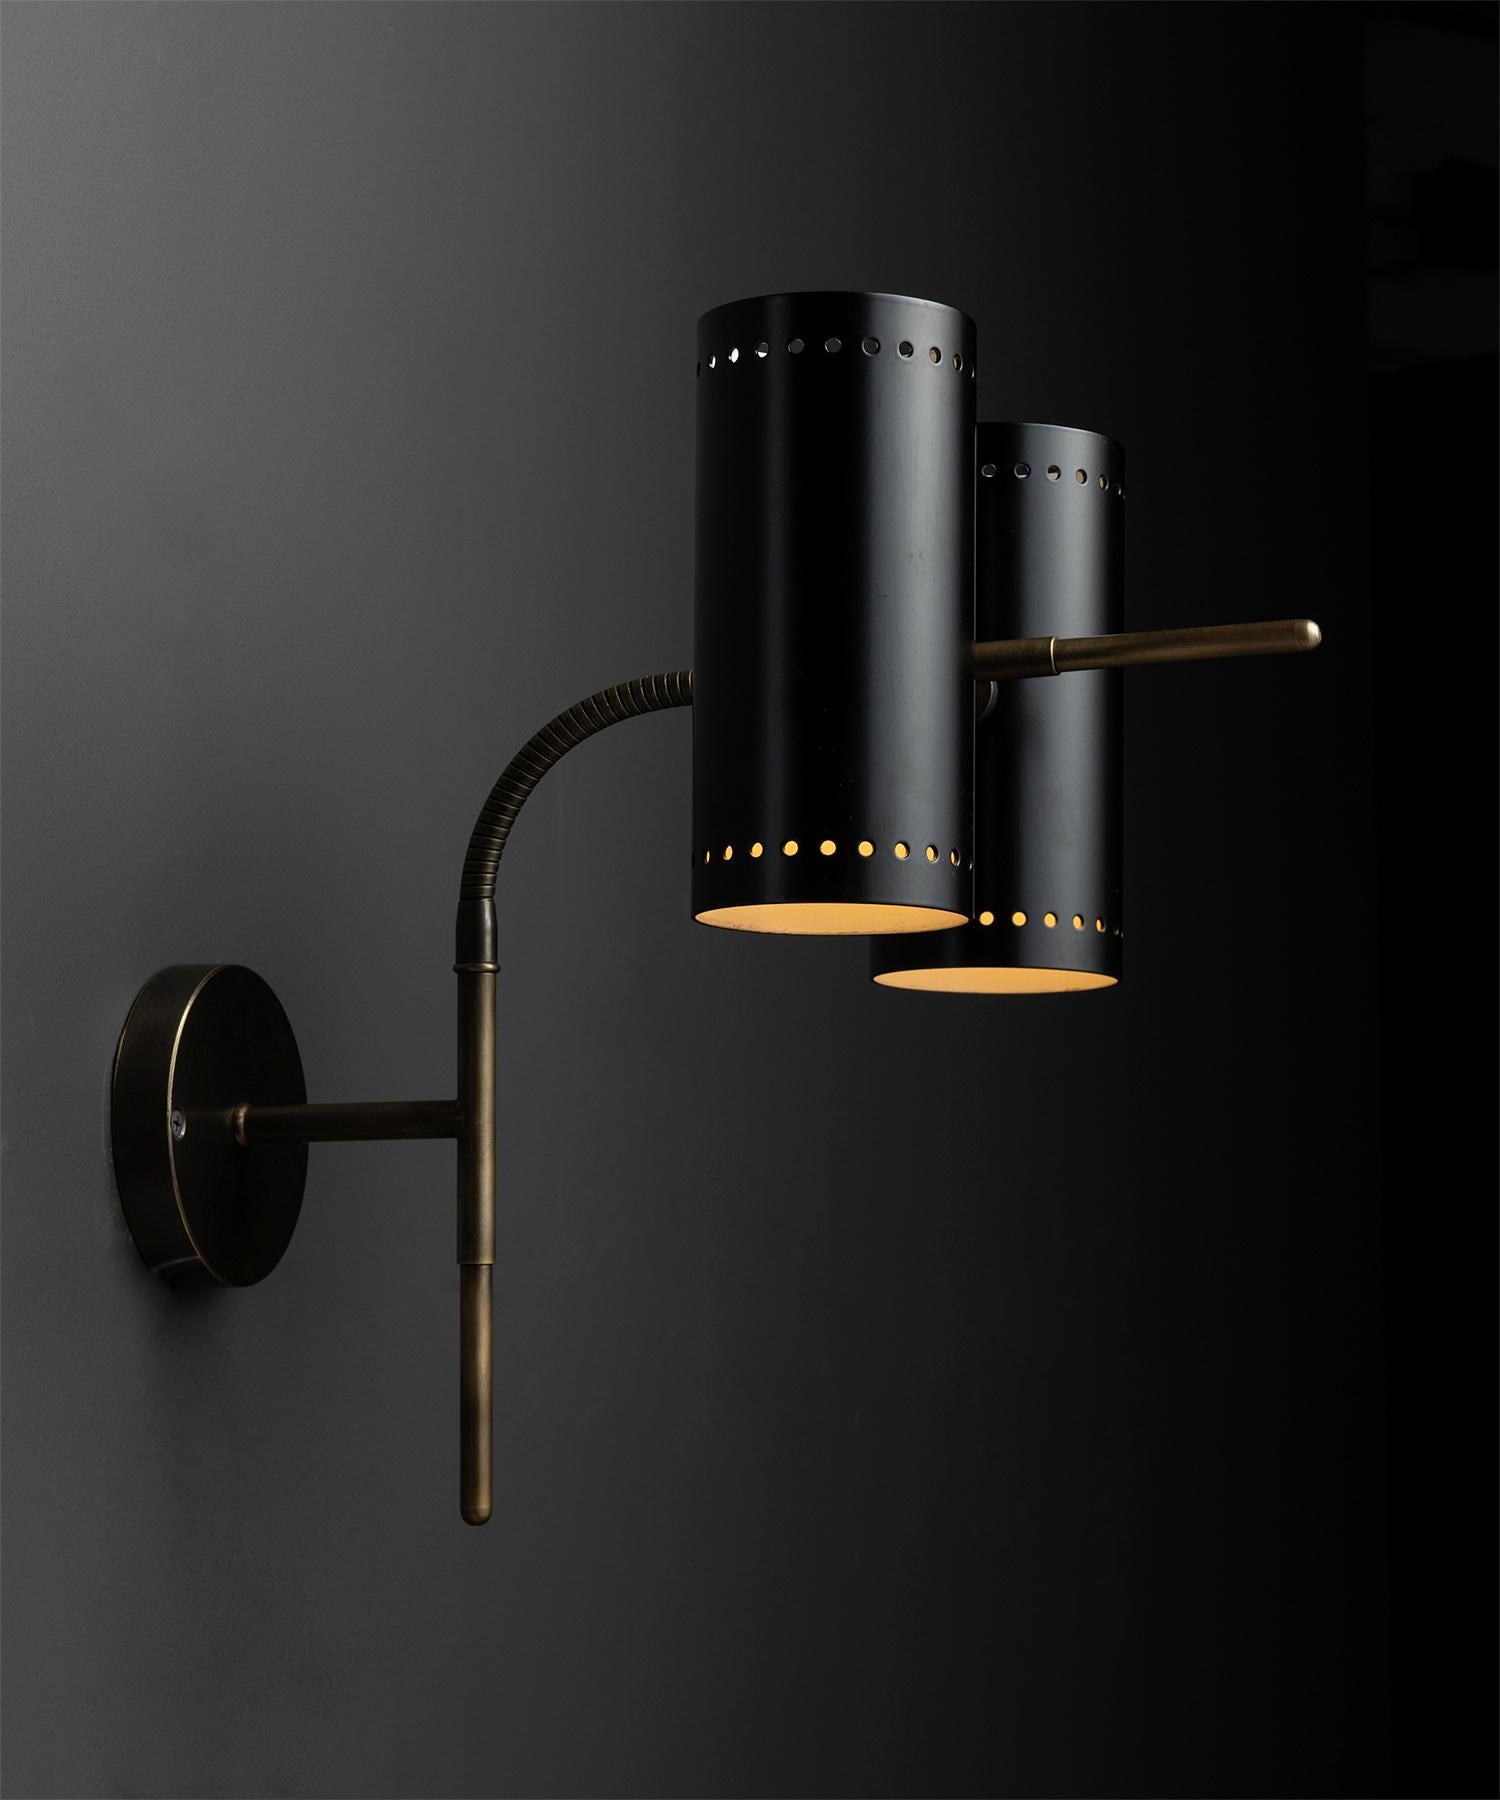 Articulating double wall sconce.

Made in Italy.

Black metal & brass fixture, with bendable arm, double light source both functional and aesthetically elegant.

Measures: 9.75”w x 15”d x 14.5”h (as shown)